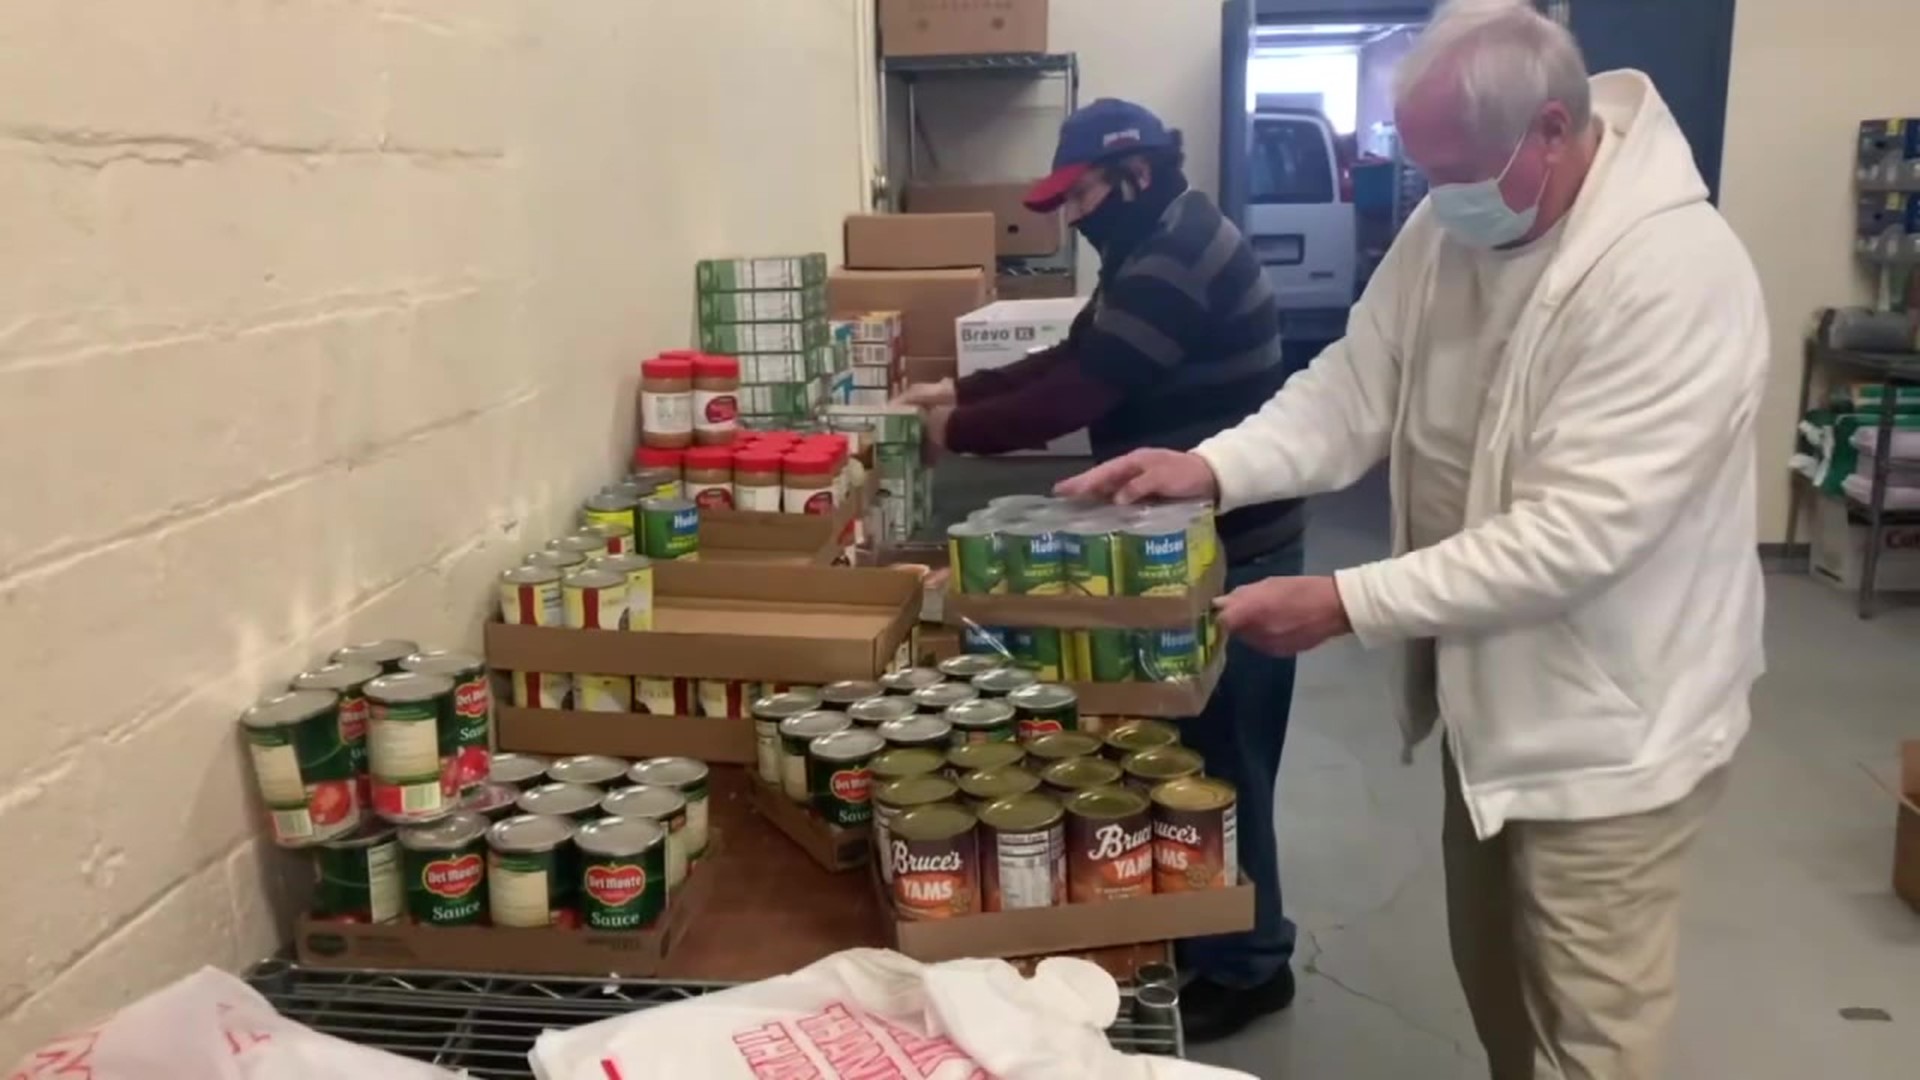 St. Vincent de Paul Kitchen and Food Pantry distributed food for Easter dinners to those in need in Wilkes-Barre.